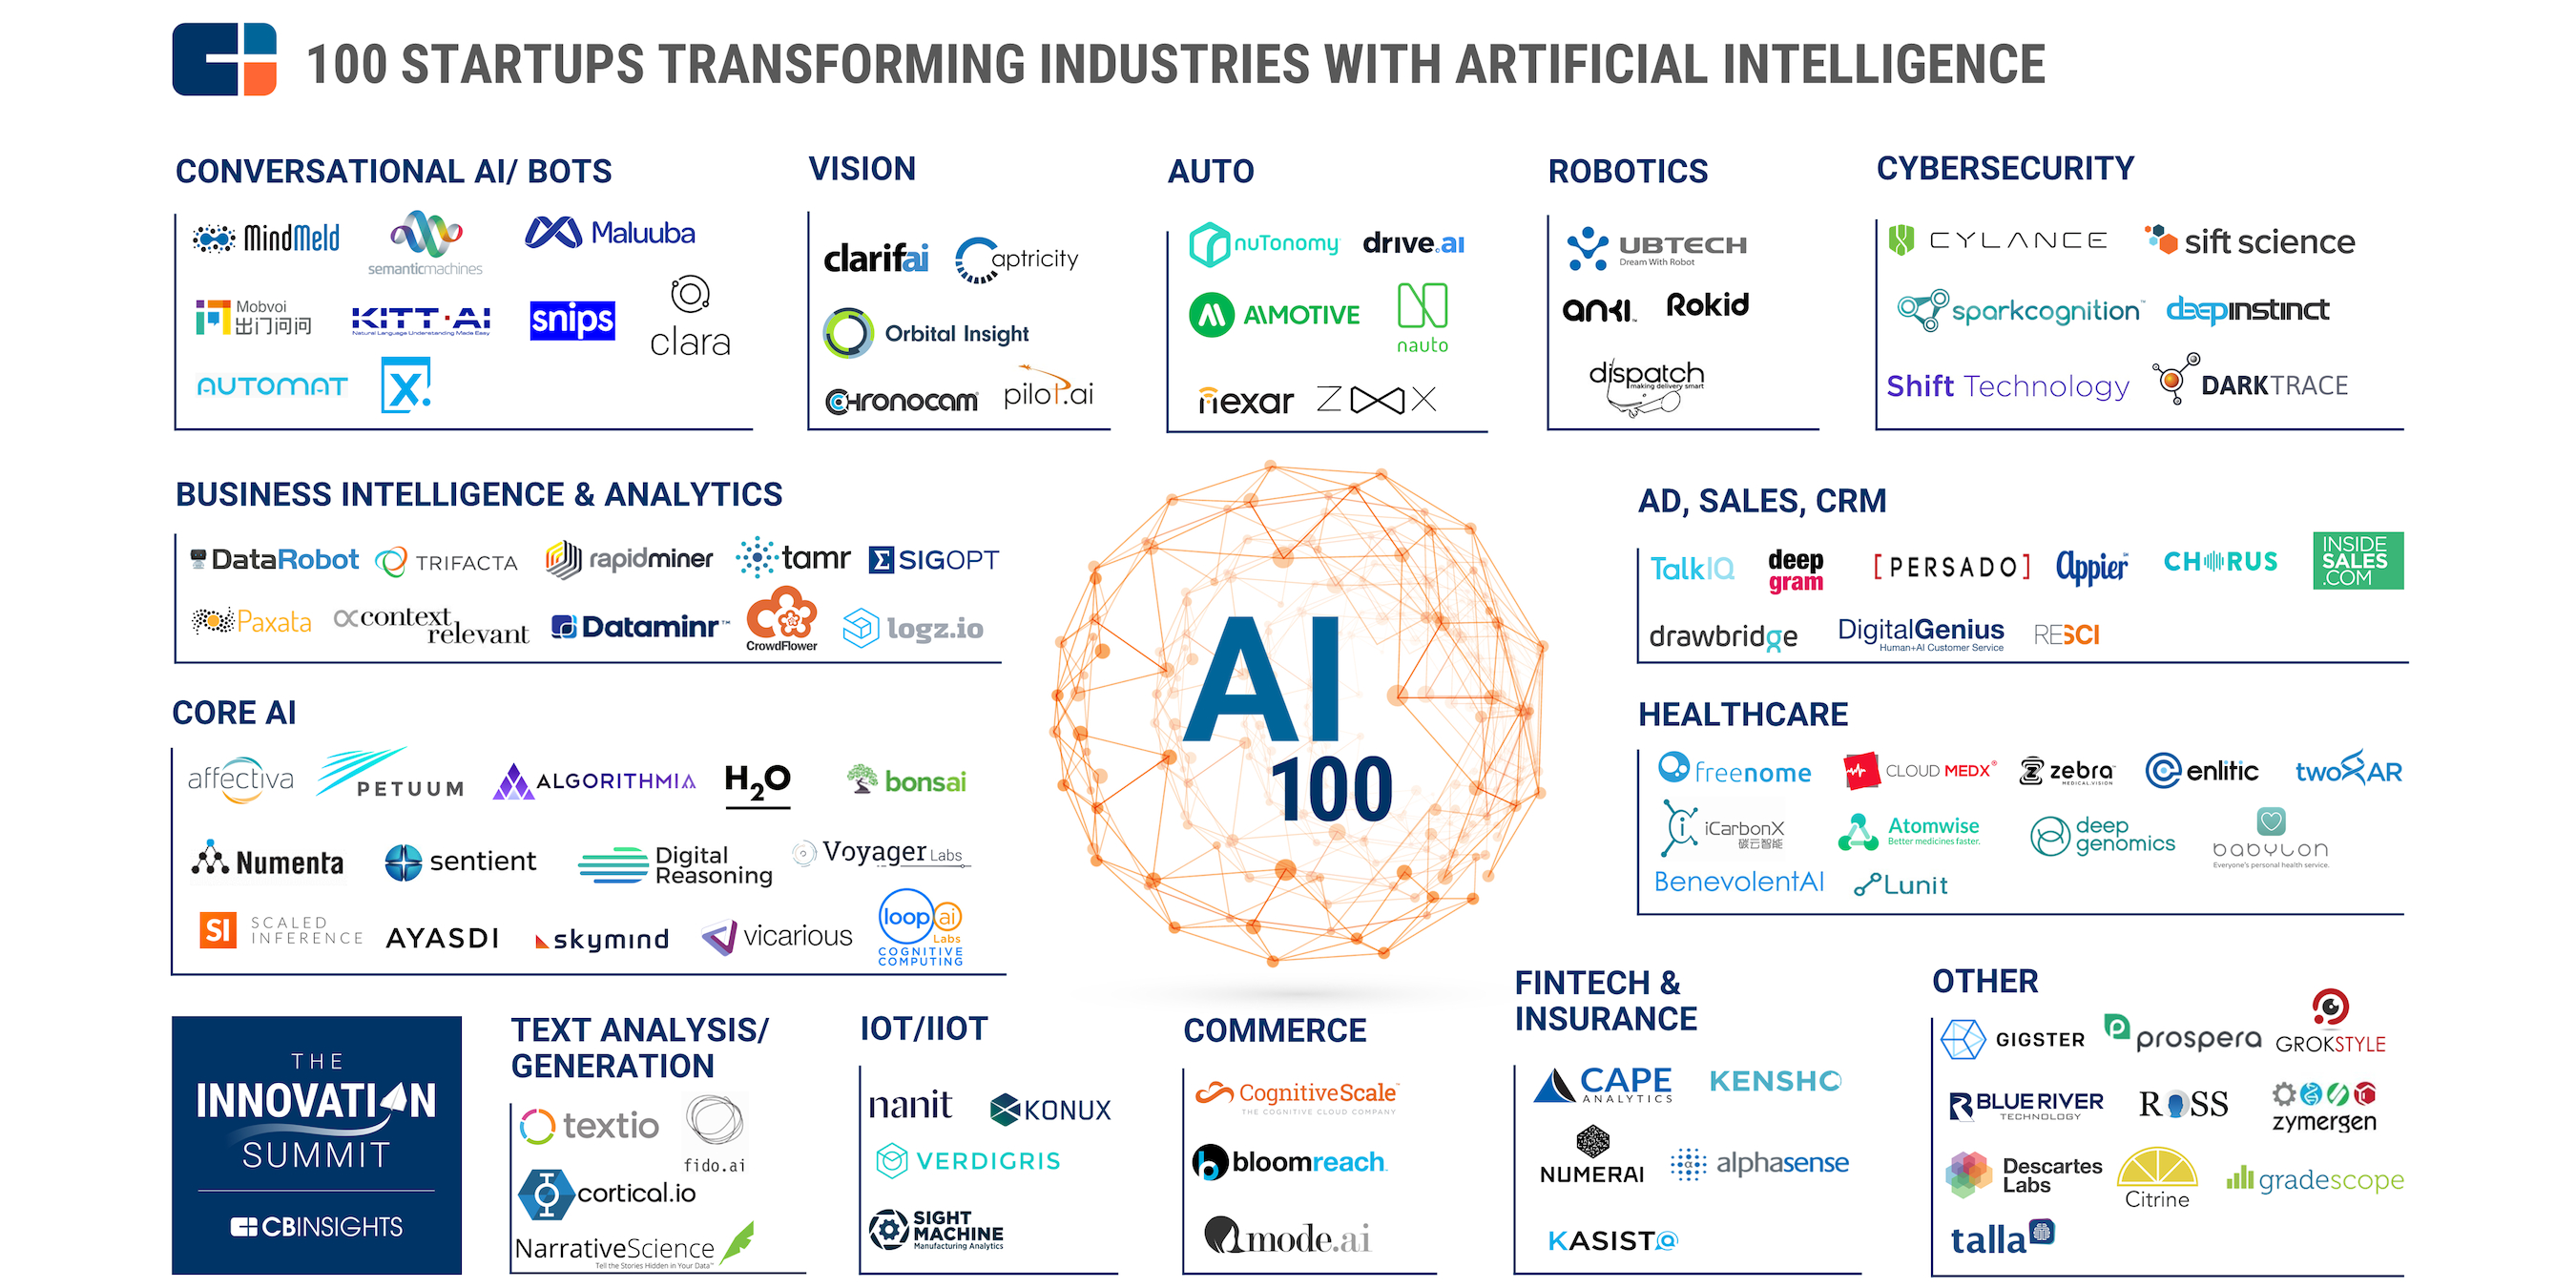 CBInsights 100 Startups transforming industries with artificial intelligence